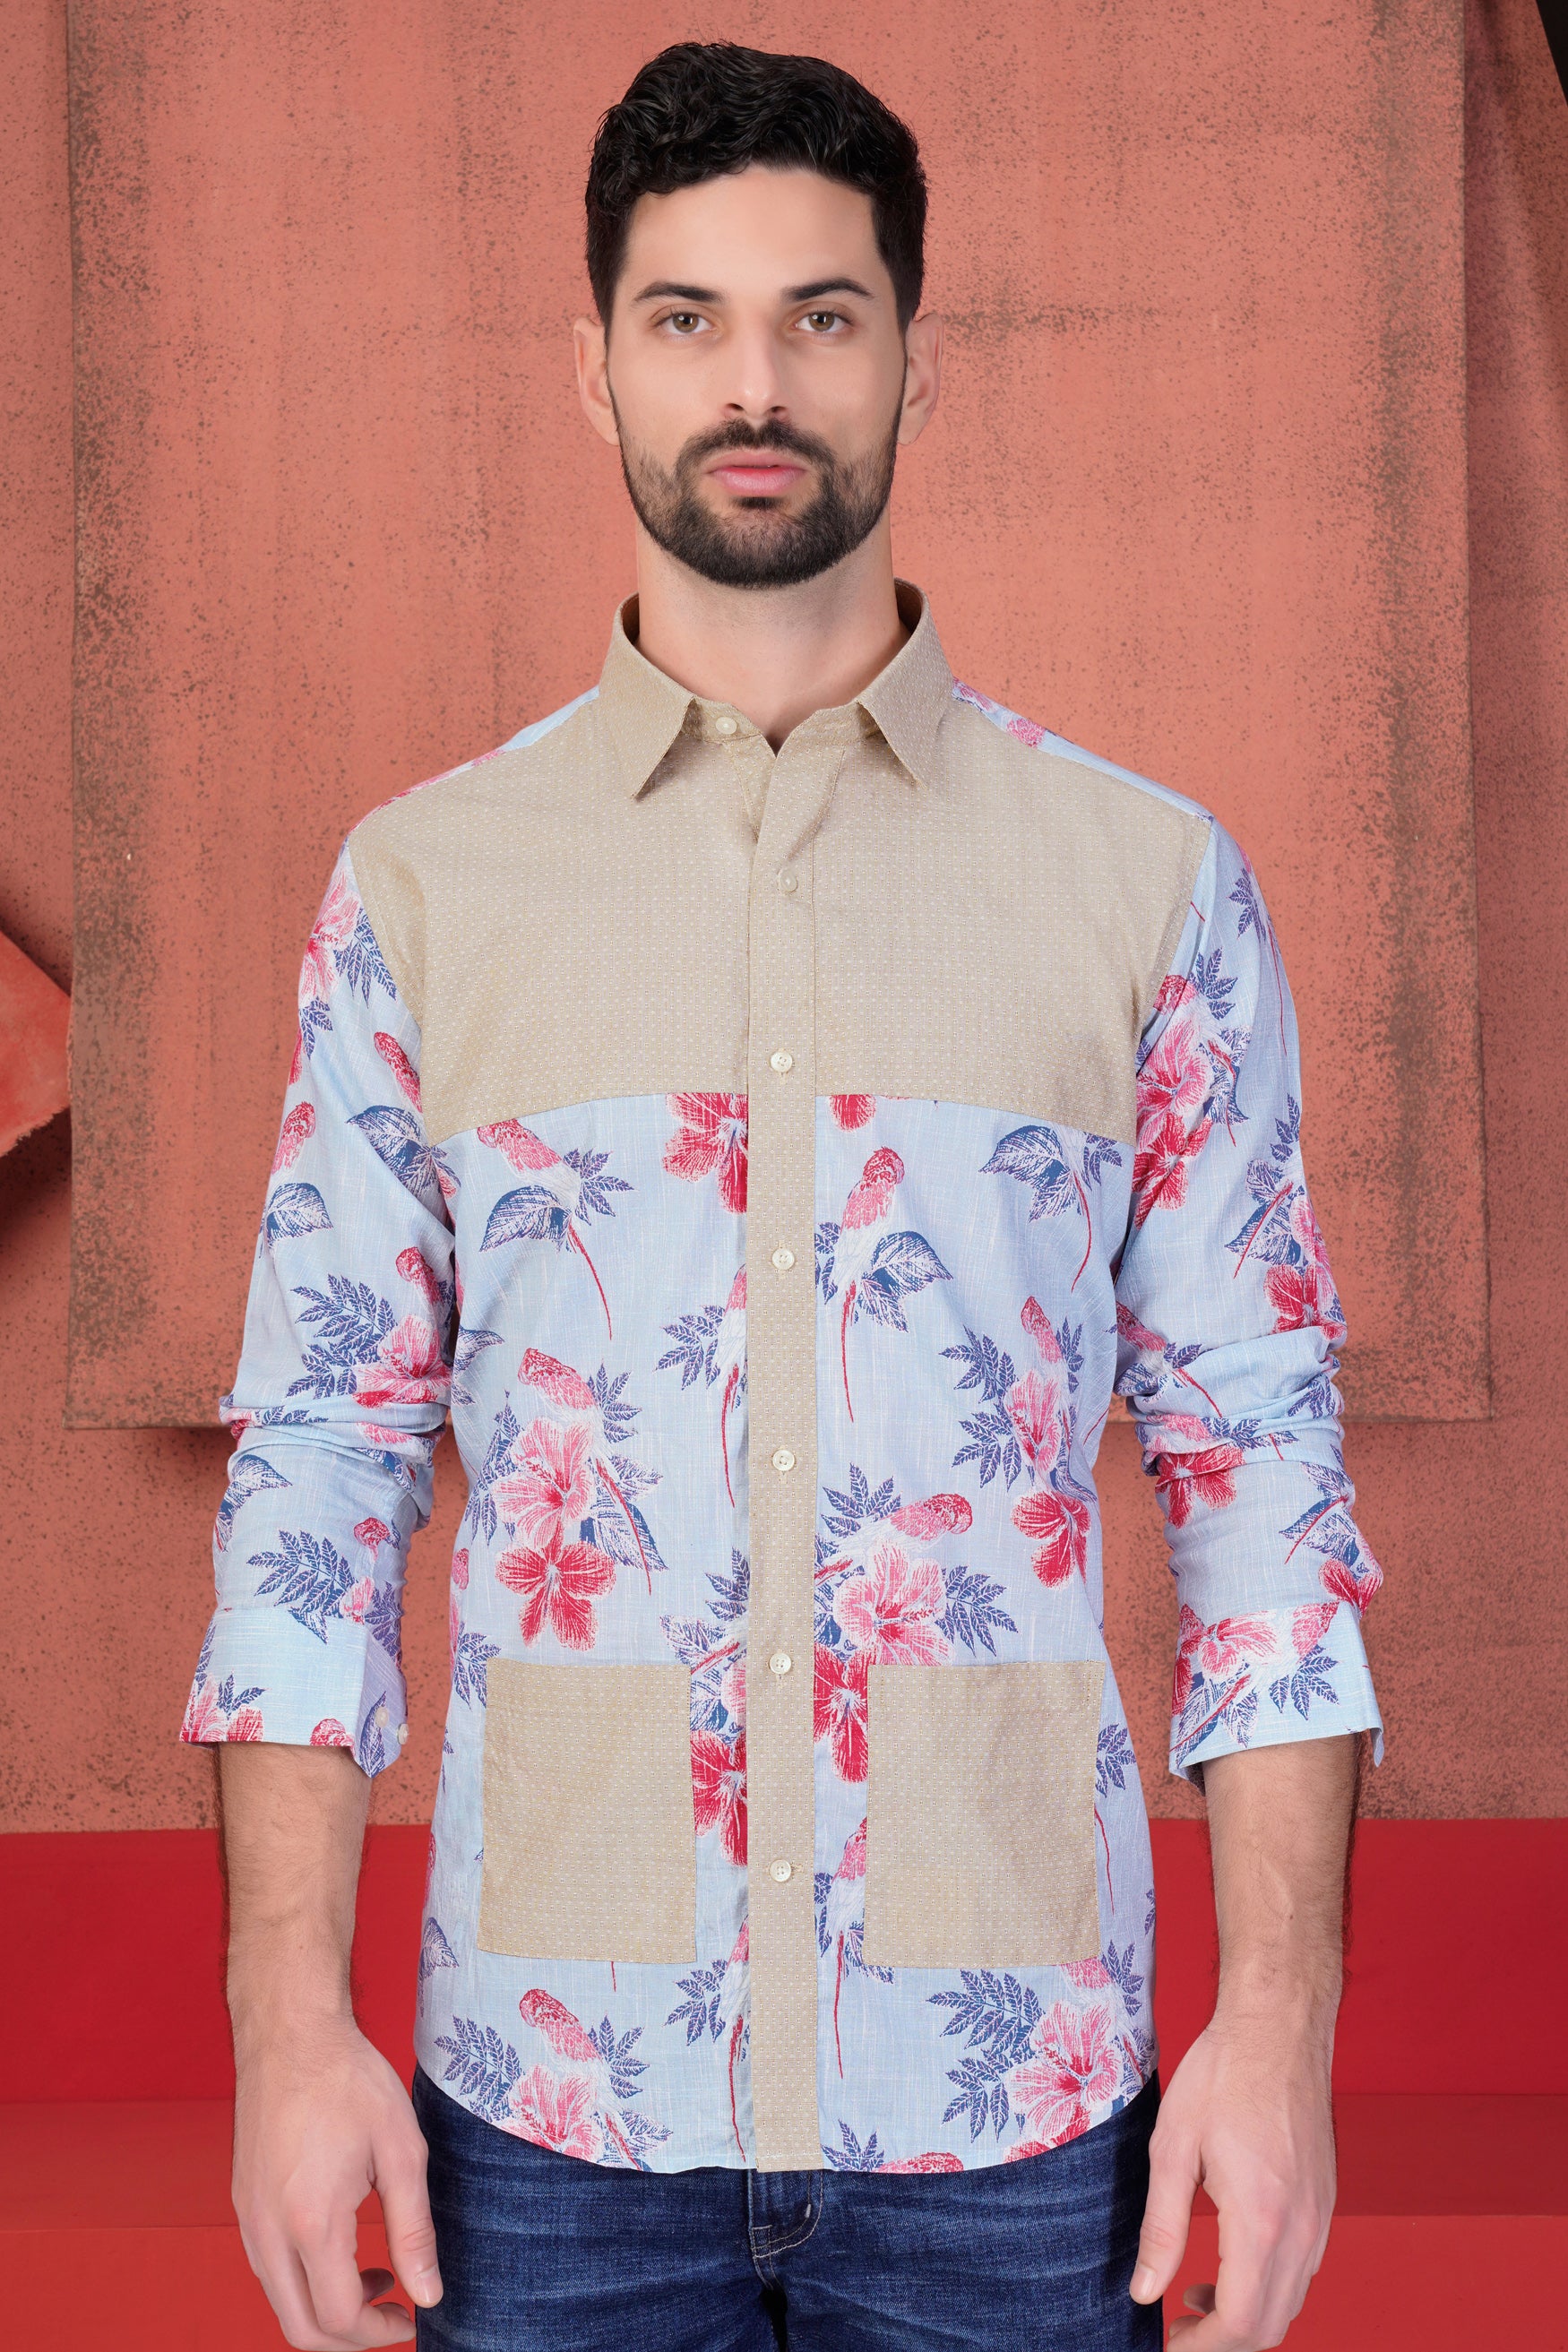 Rodeo Dust Brown and Malibu Blue Multicolour Floral Printed with King of Spades Patchwork Chambray Designer Shirt